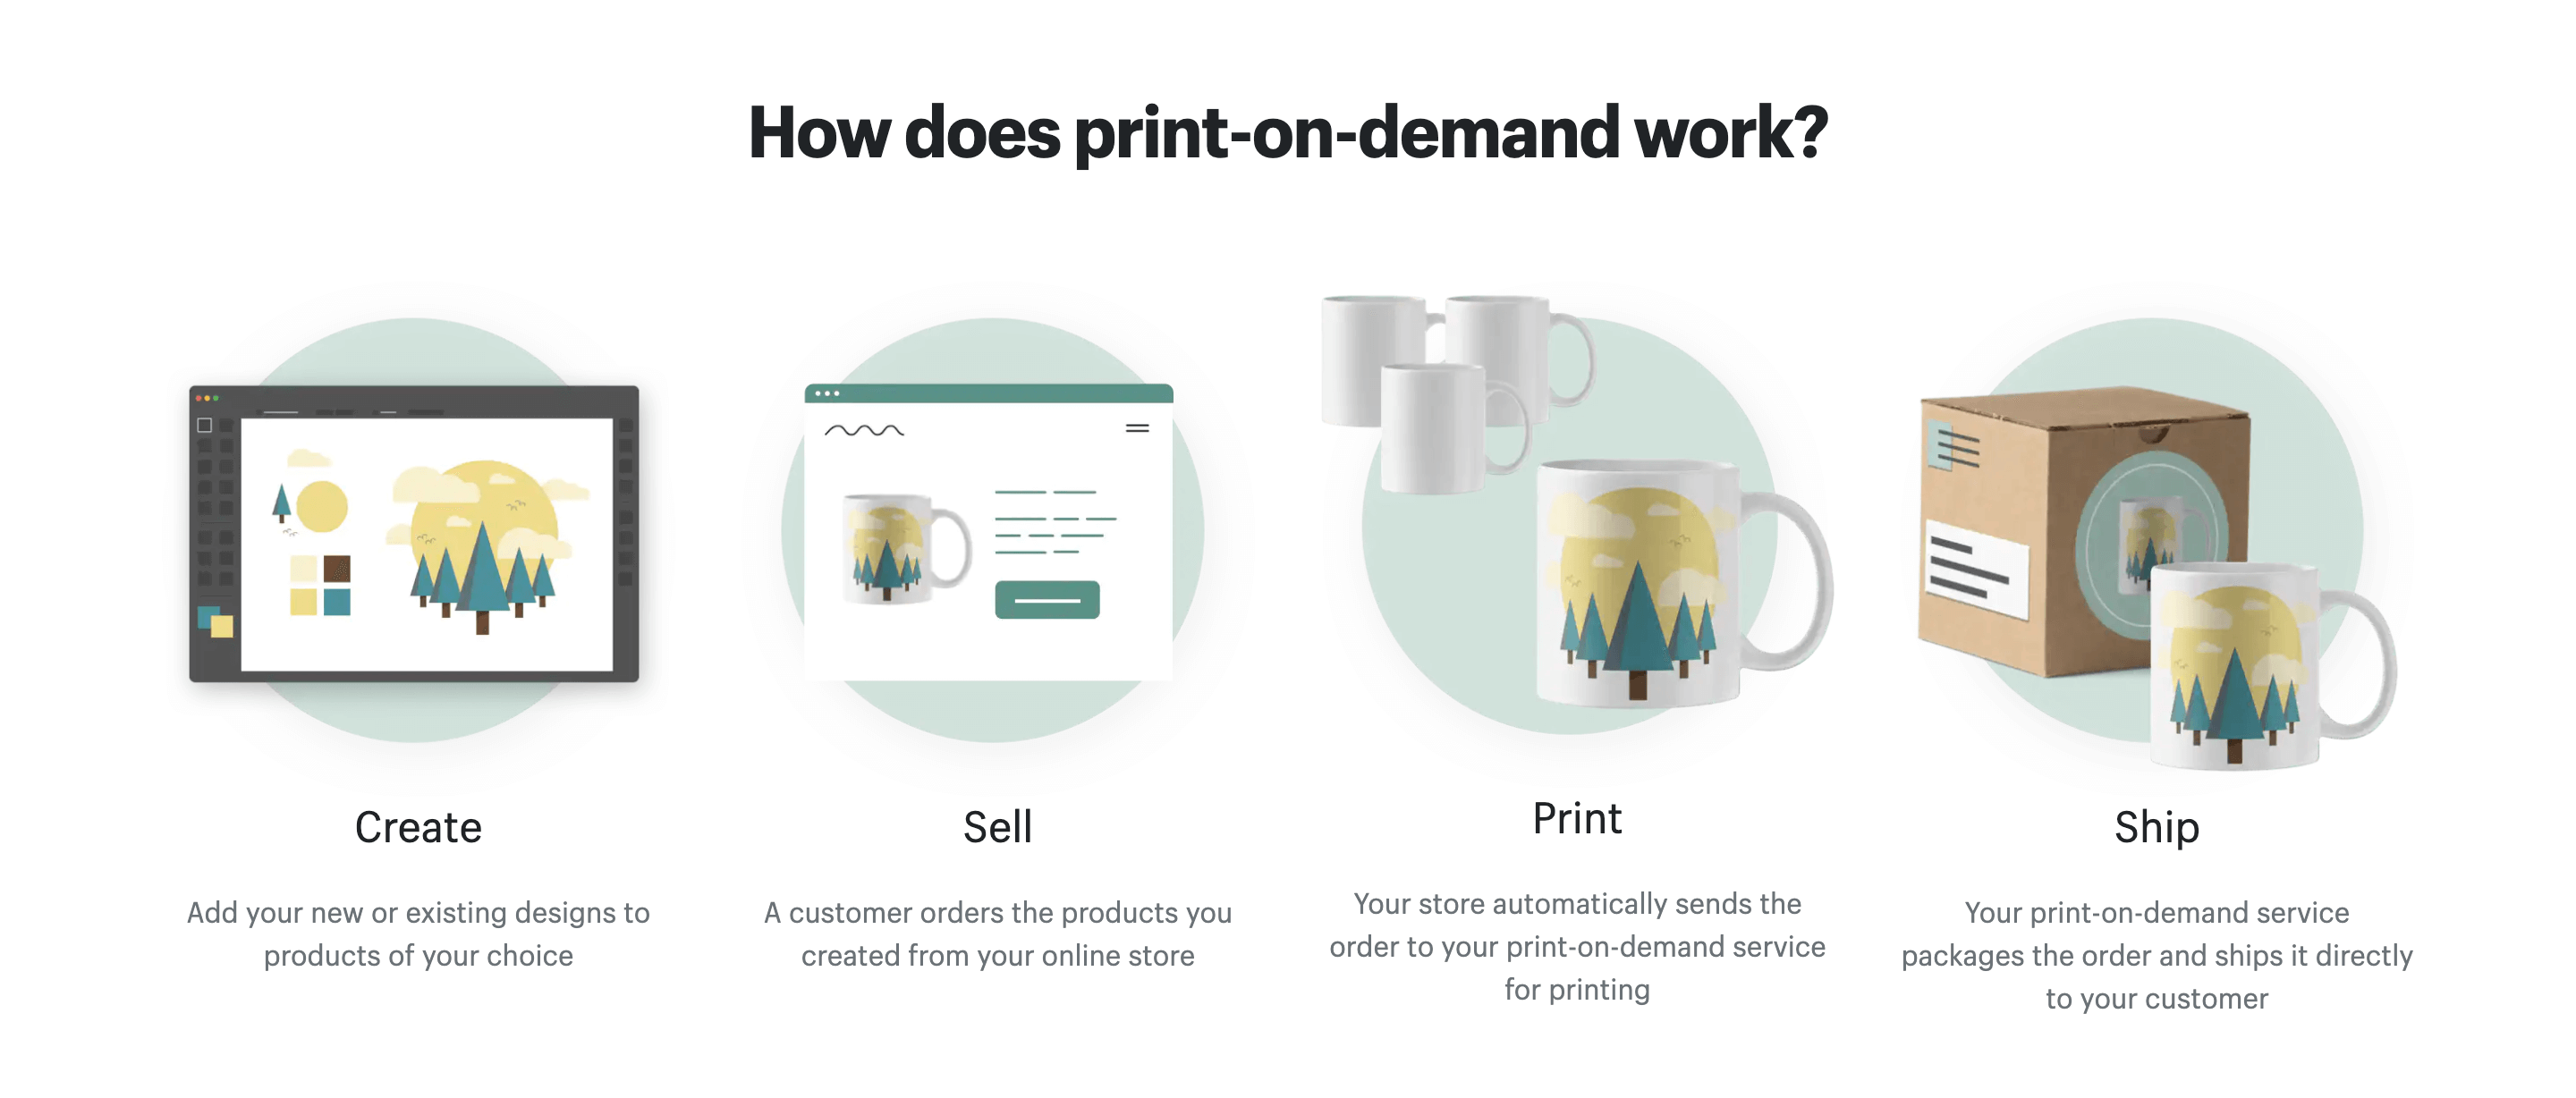 How print-on-demand works